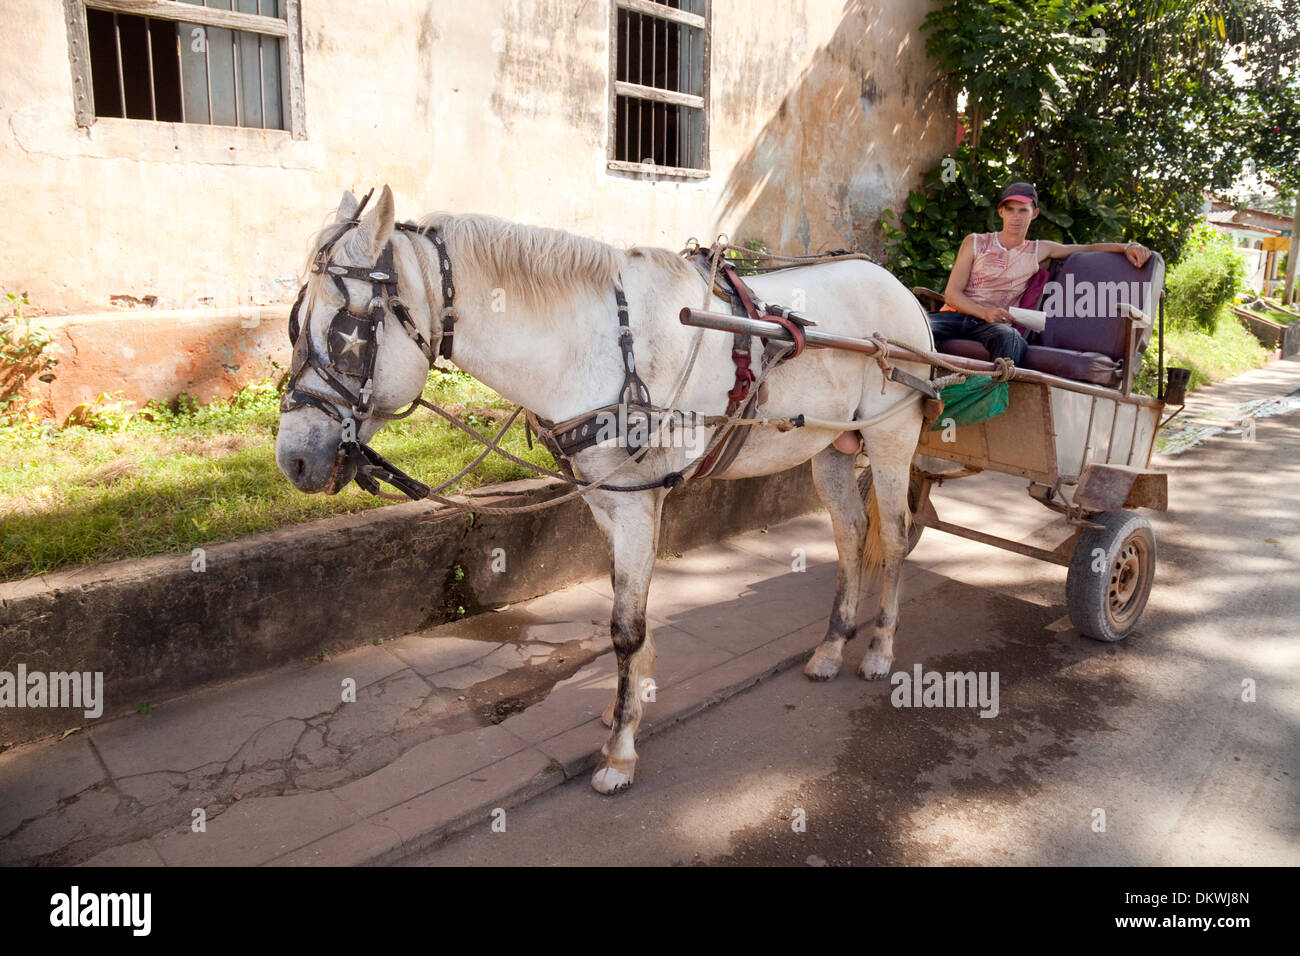 Horse and cart with local driver, Vinales town, Cuba, Caribbean Stock Photo